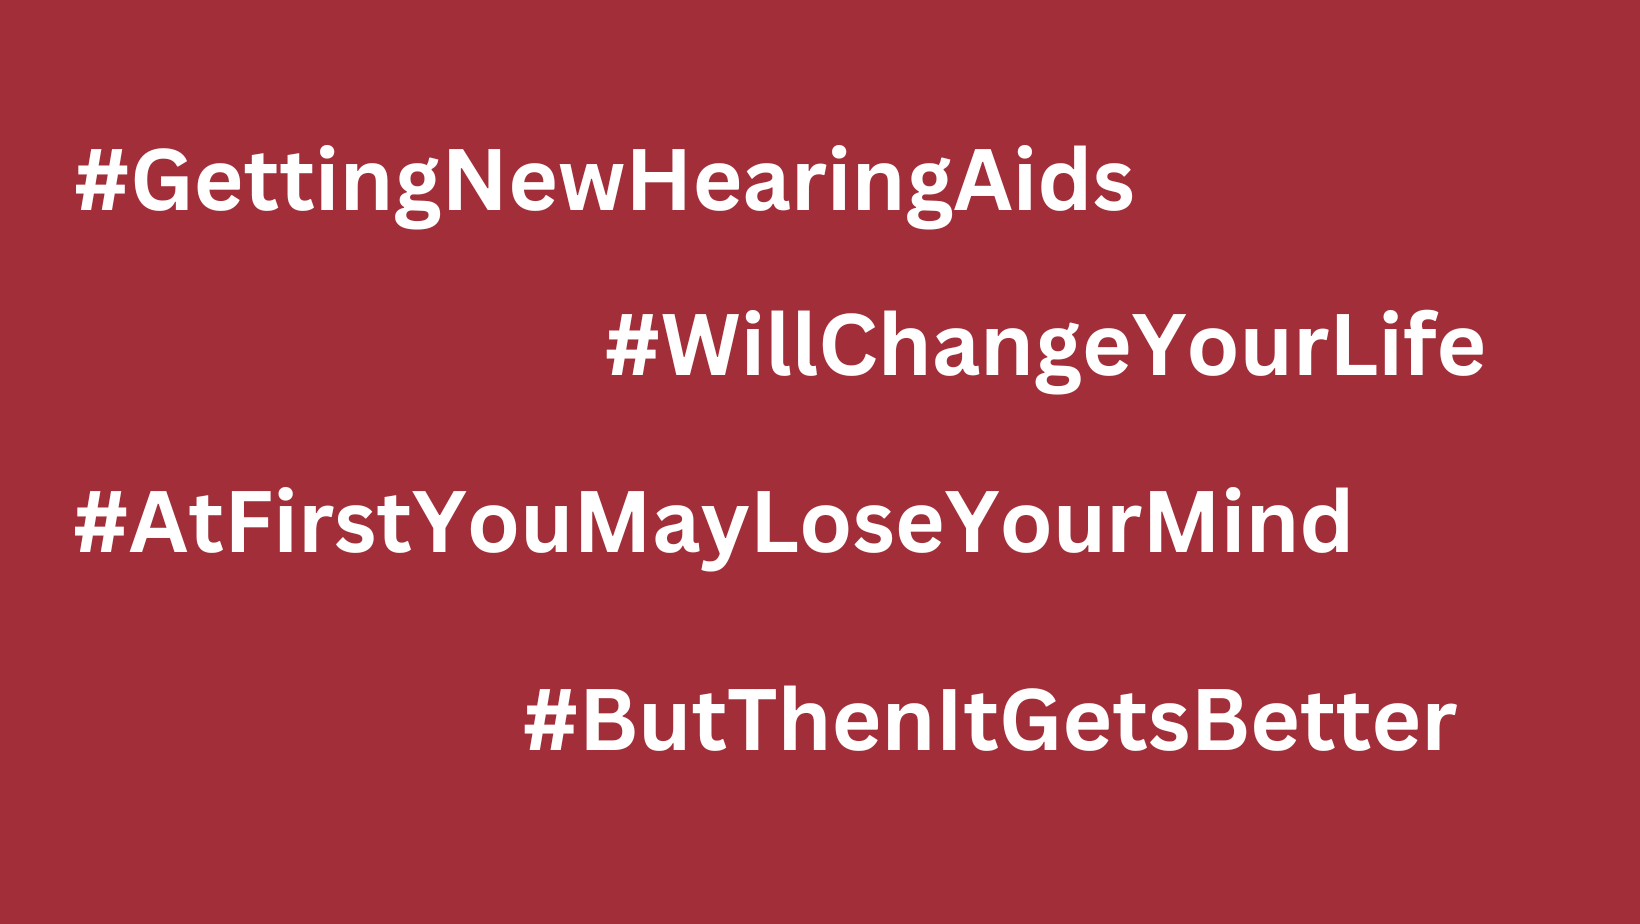 Featured image for “Emotional Hashtags for New Hearing Devices (#keepoutofmyway)”